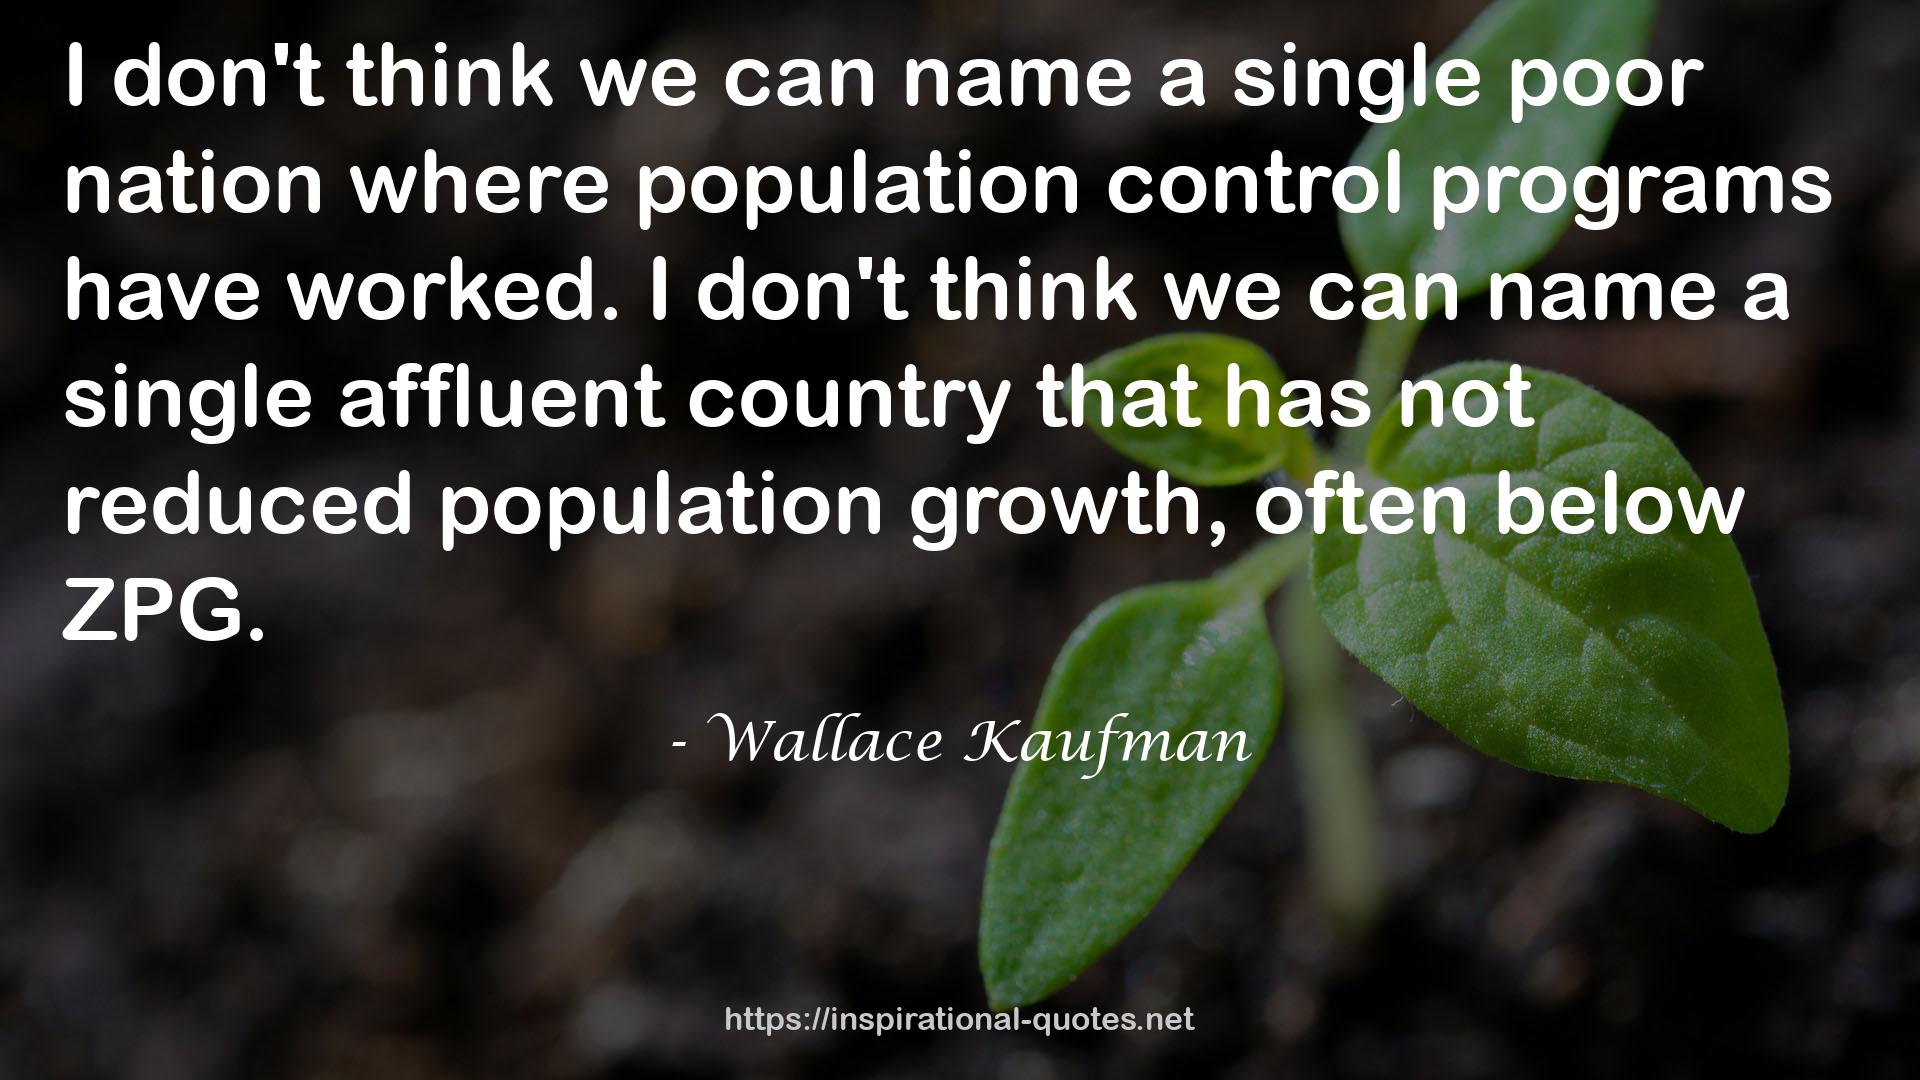 Wallace Kaufman QUOTES